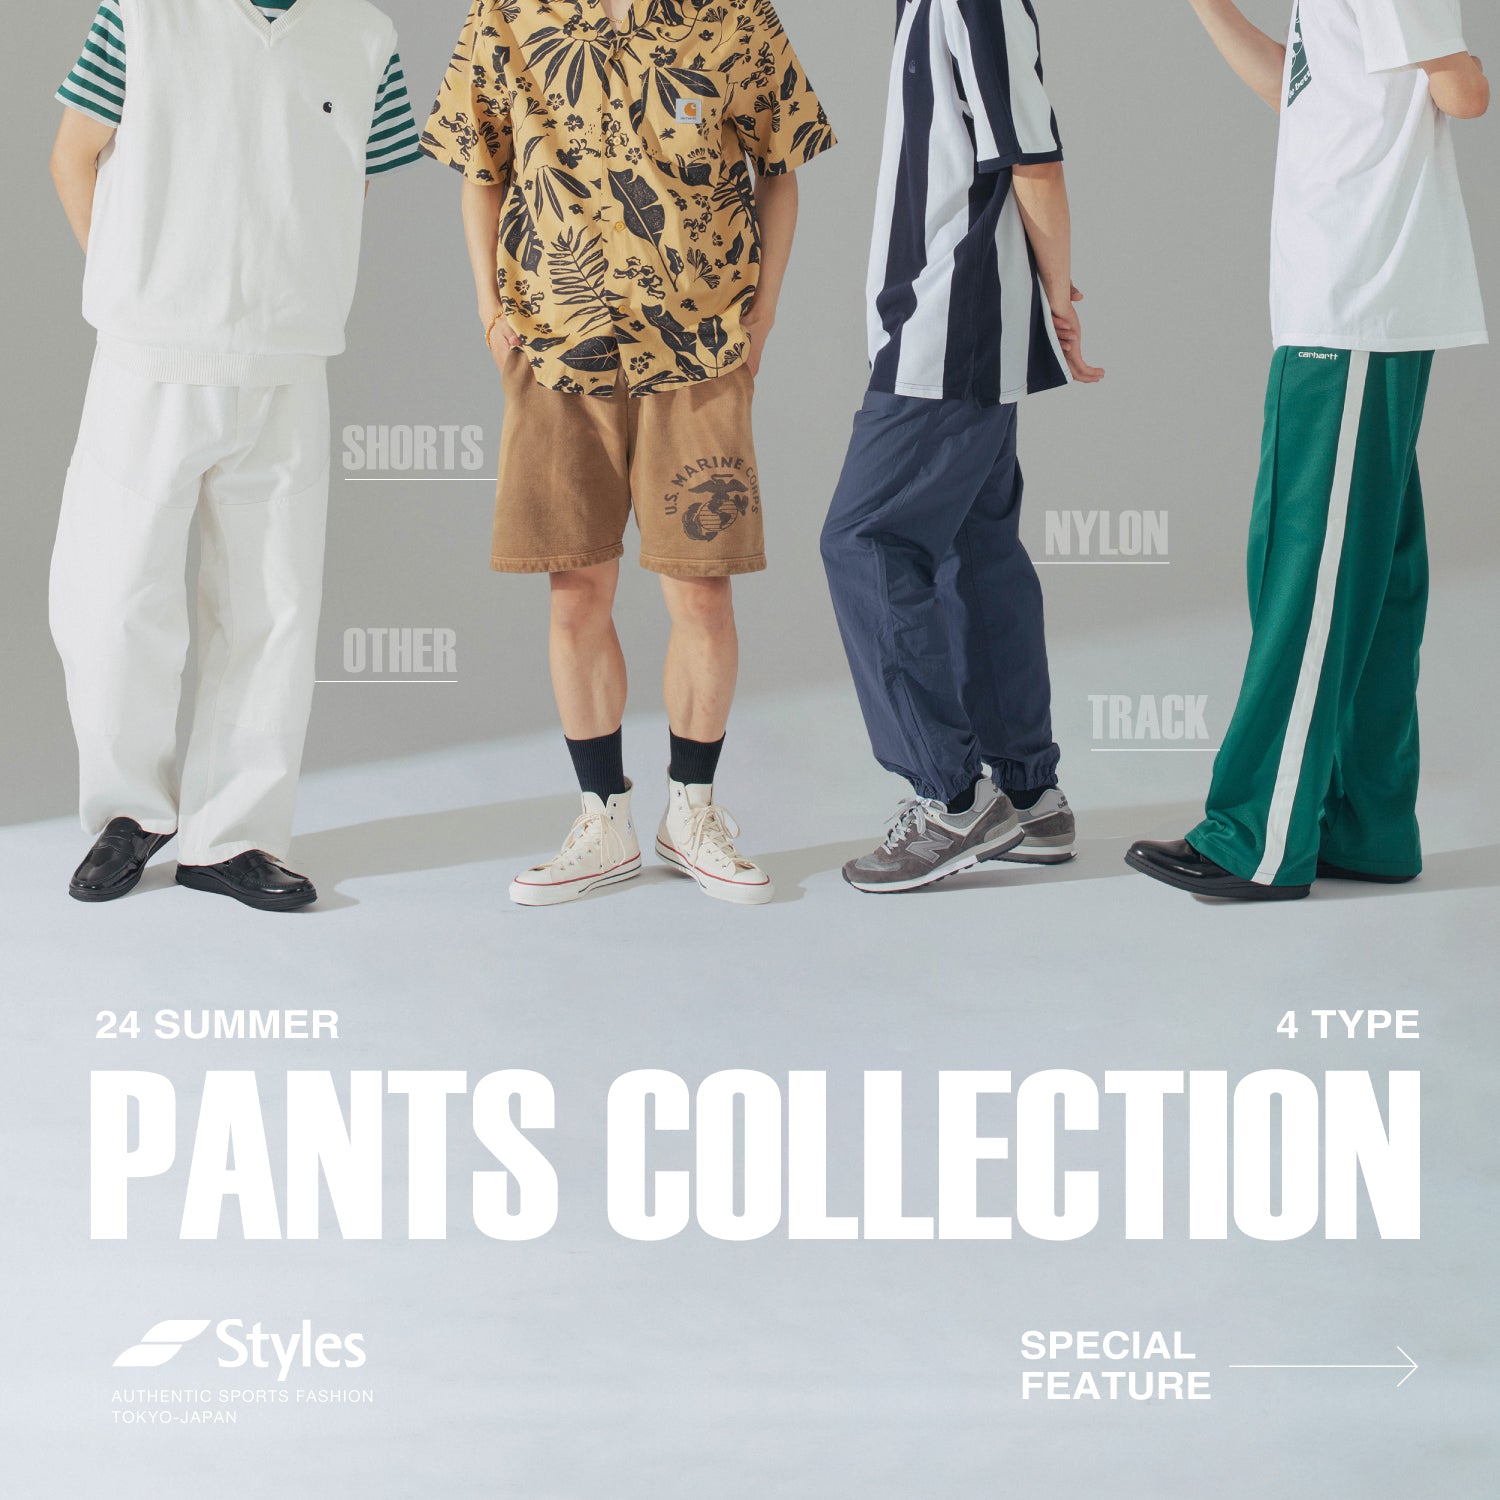 Styles PANTS COLLECTION